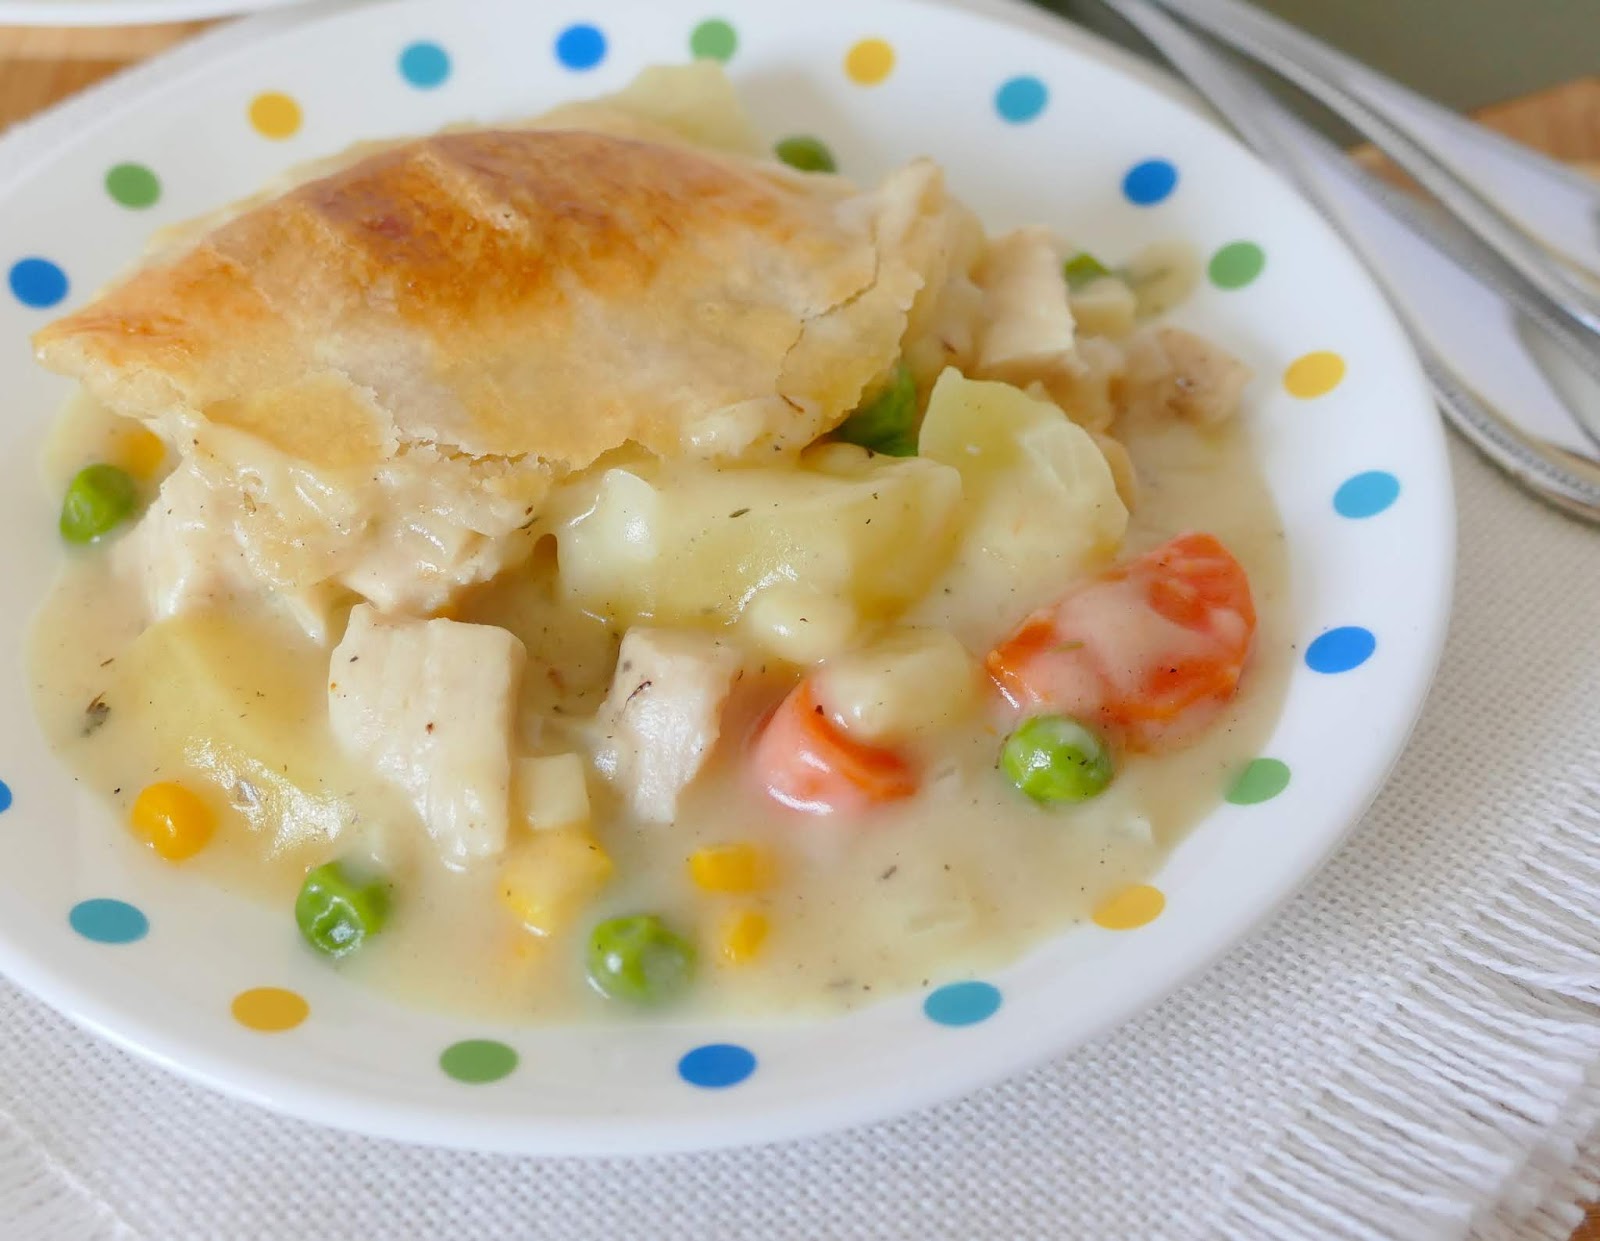 This delicious pot pie is a tried and true, comfort food family favorite! Perfect for a fall or winter Sunday dinner! Great with chicken, or use turkey breast leftover from your Thanksgiving or Christmas meal!